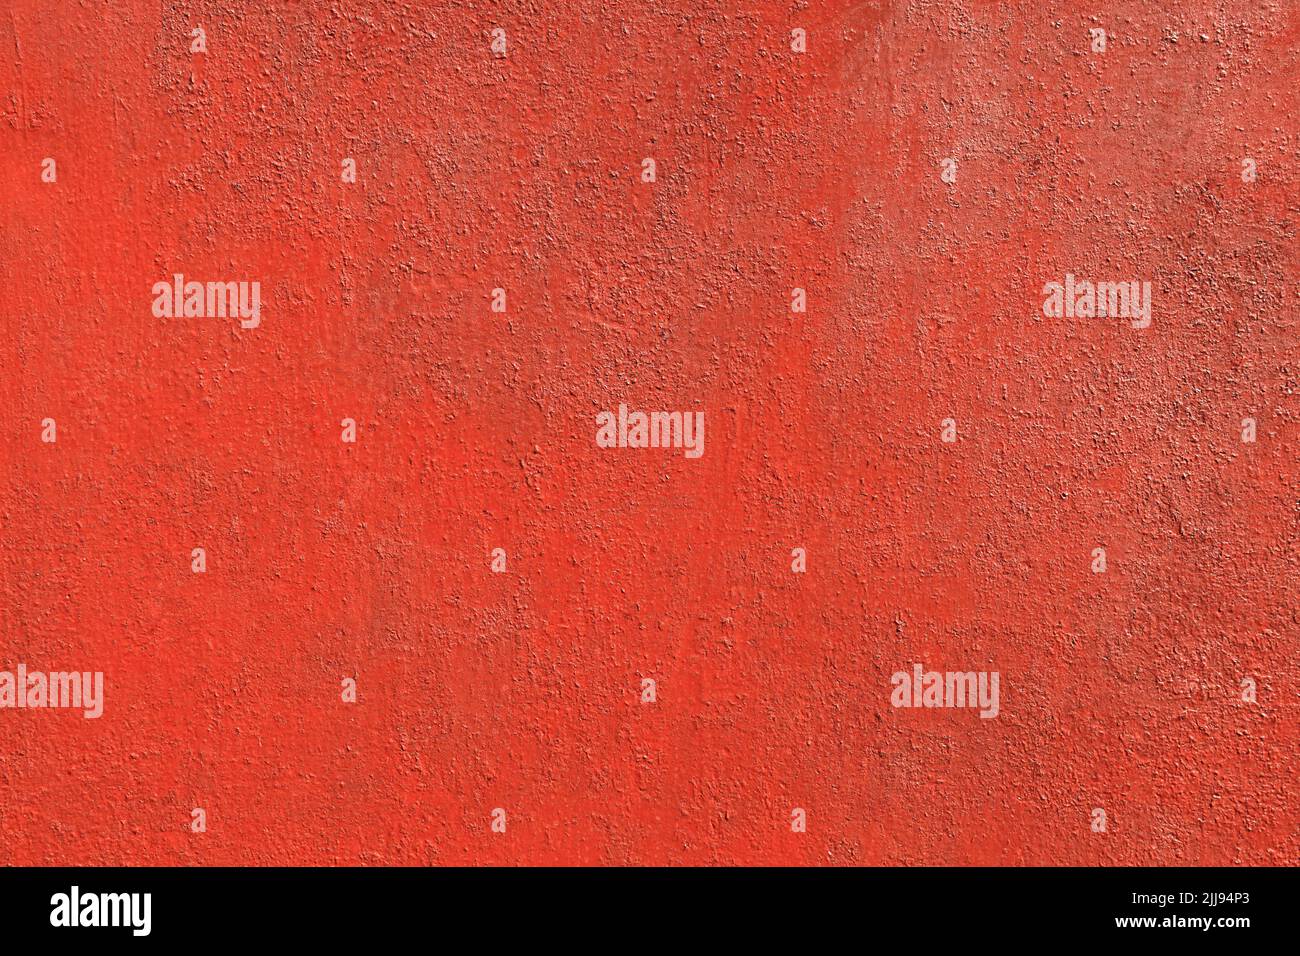 Metall wall, background, texture. Rusted metallic backdrop. An old red and rusty surface with faded uneven color. Abstract rust pattern Stock Photo